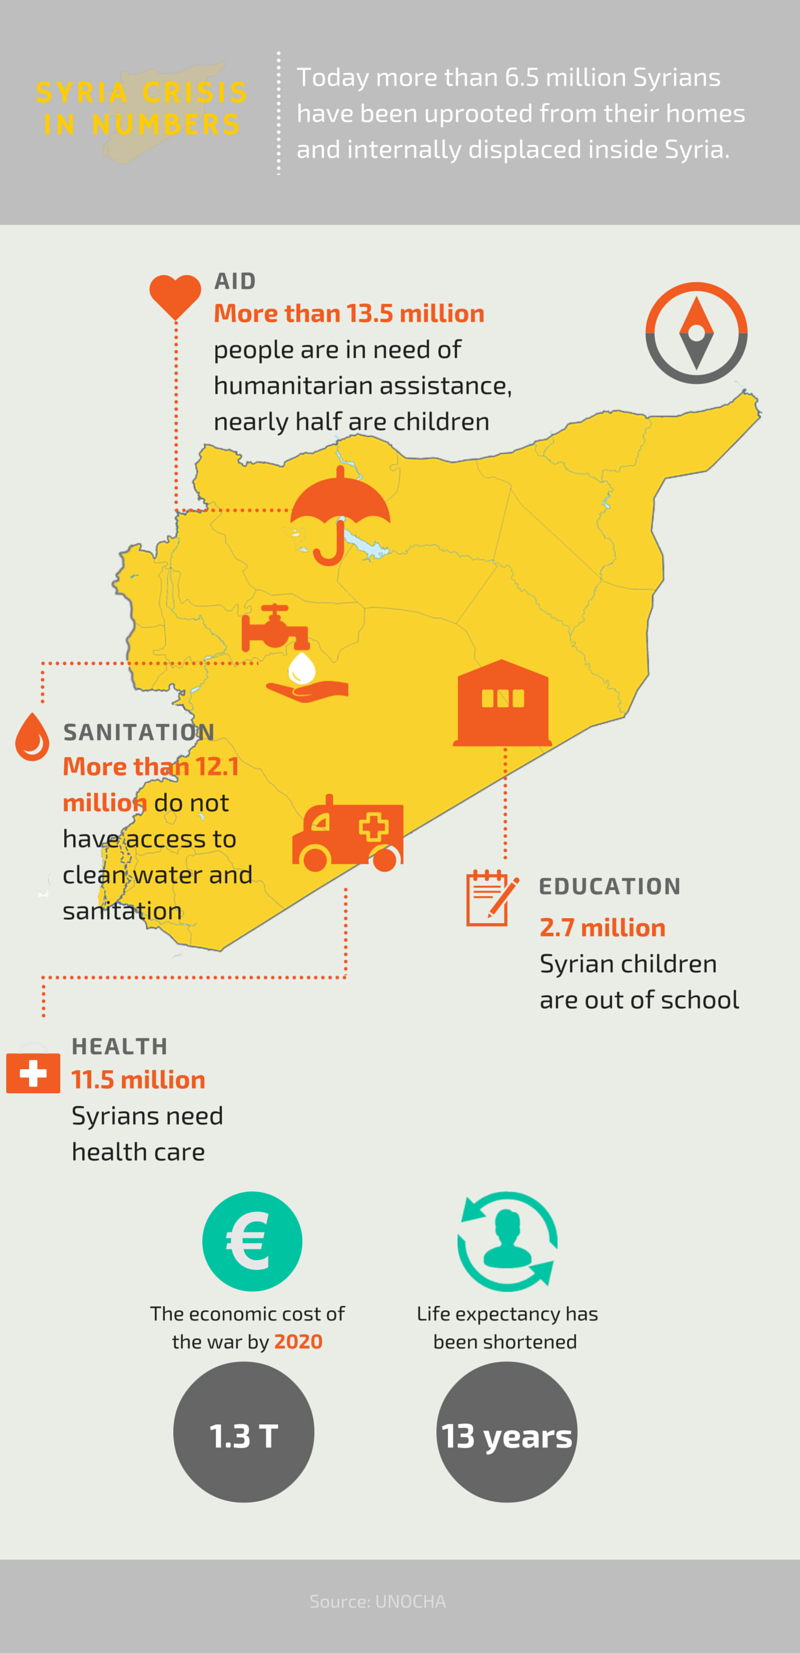 Today more than 6.5 million Syrians have been uprooted from their homes and internally displaced inside Syria. This infographic, part of Caritas campaign 'Syria - Peace is possible' shows the impact of civil war in Syria.